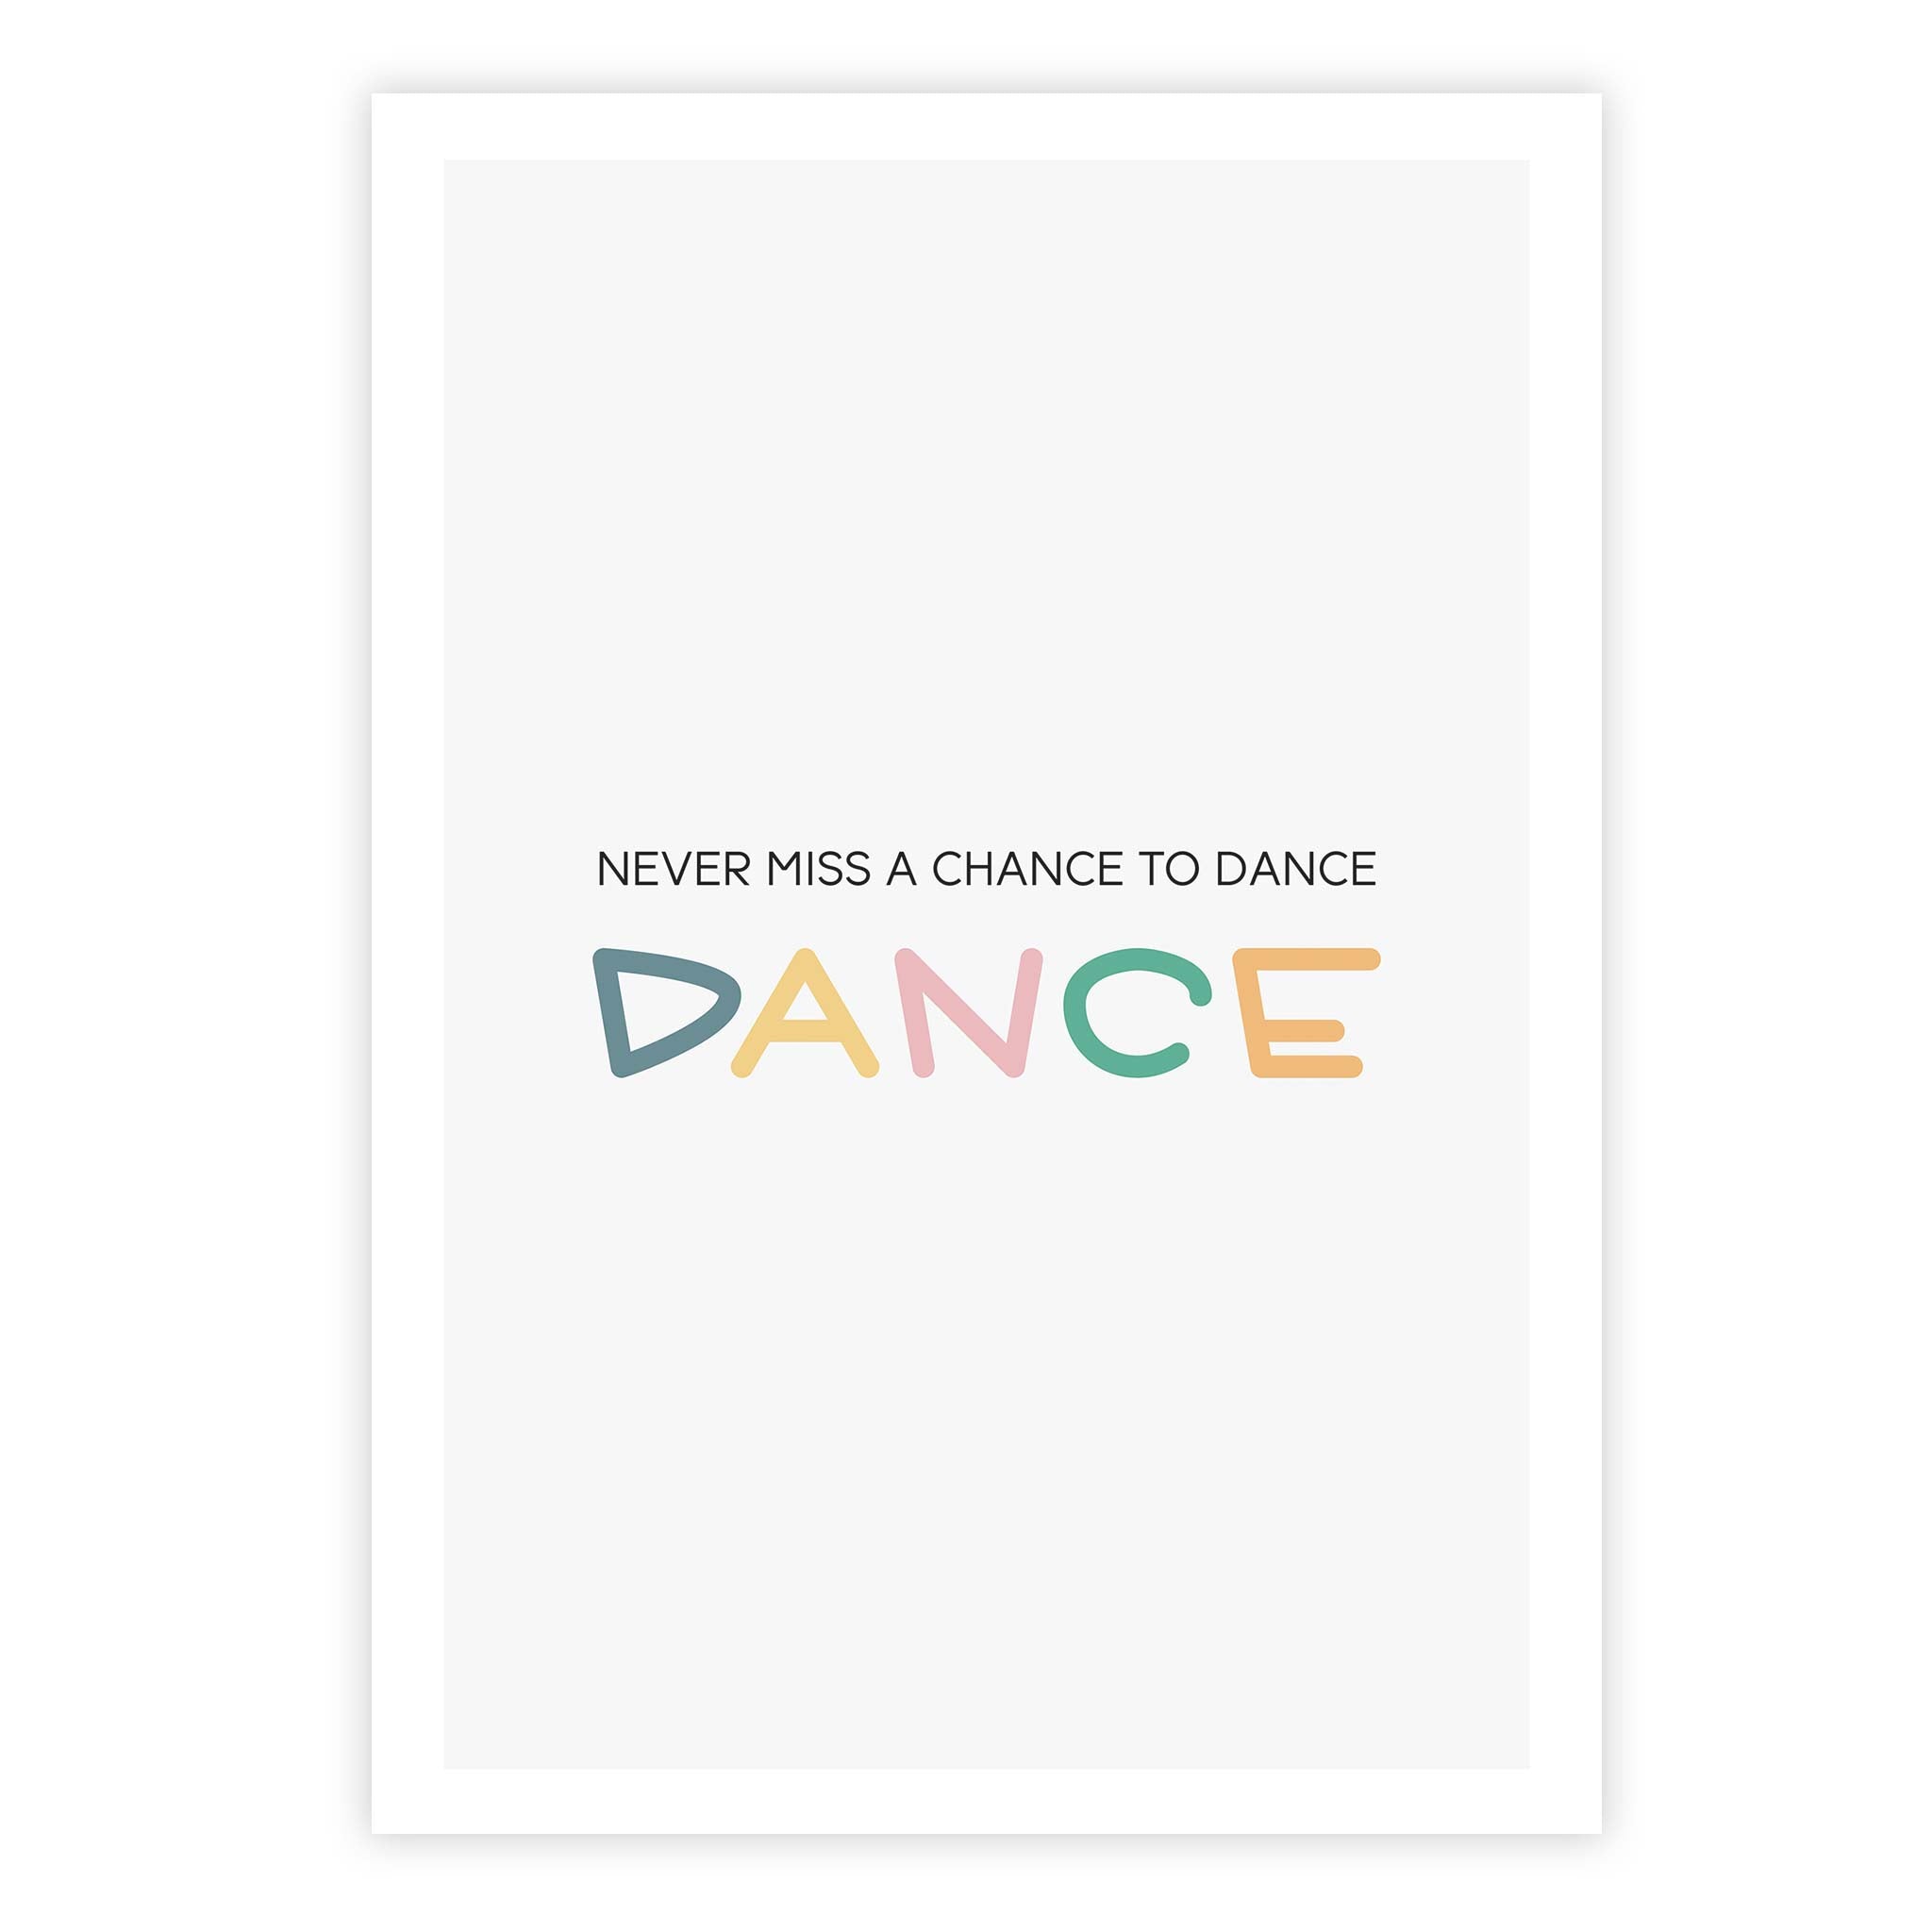 Never miss a chance to dance